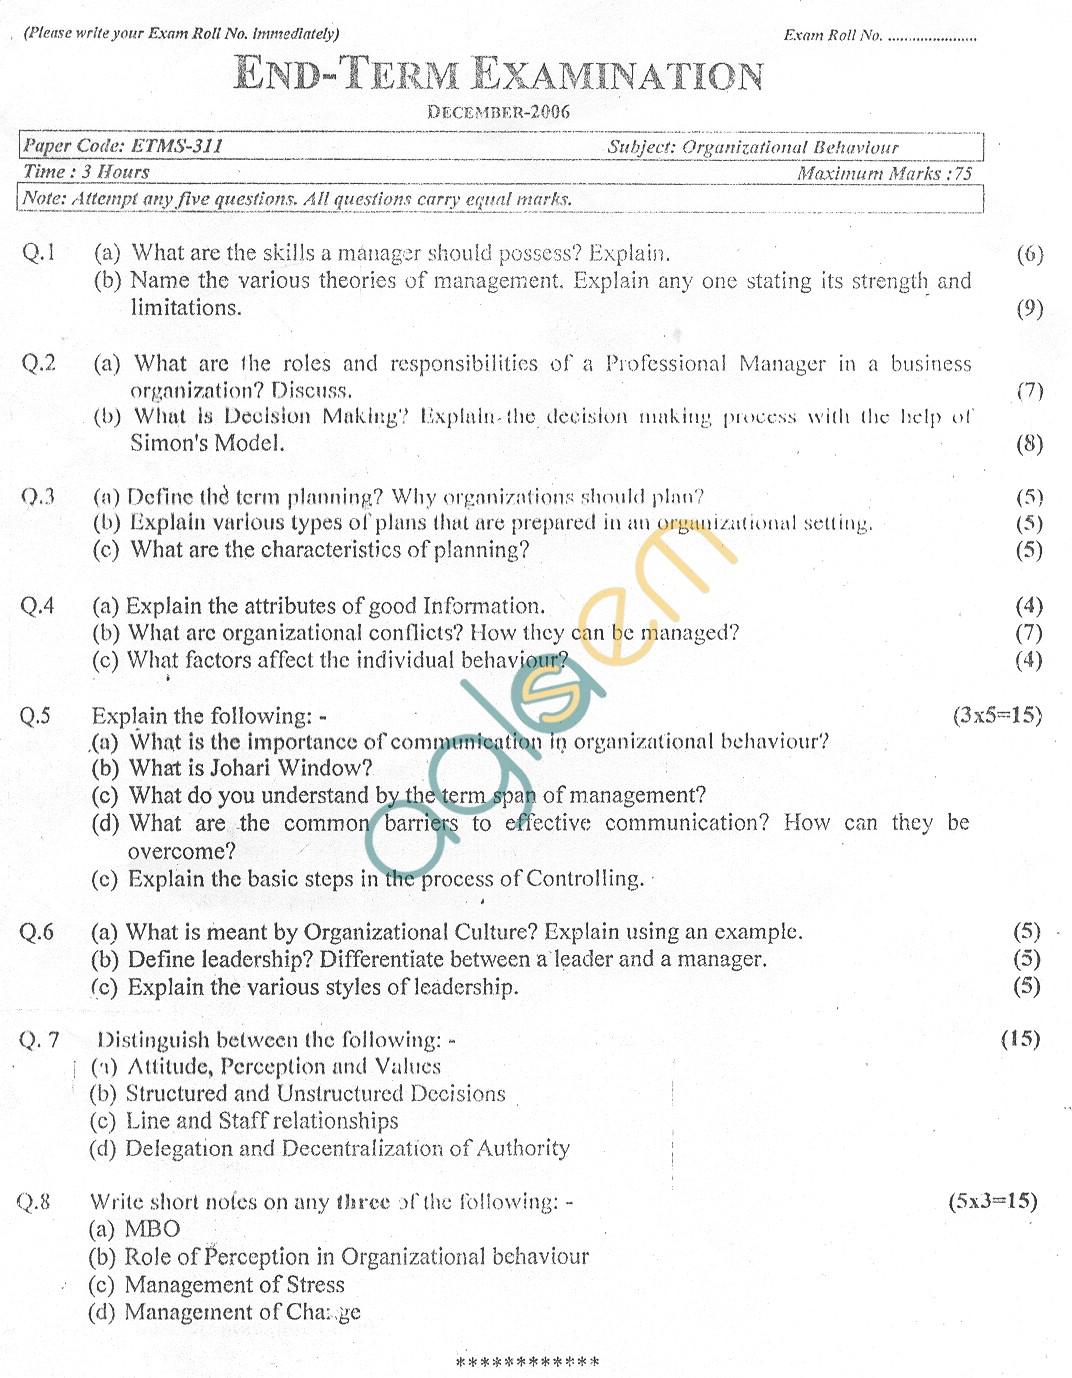 GGSIPU Question Papers Fifth Semester  end Term 2006  ETMS-311